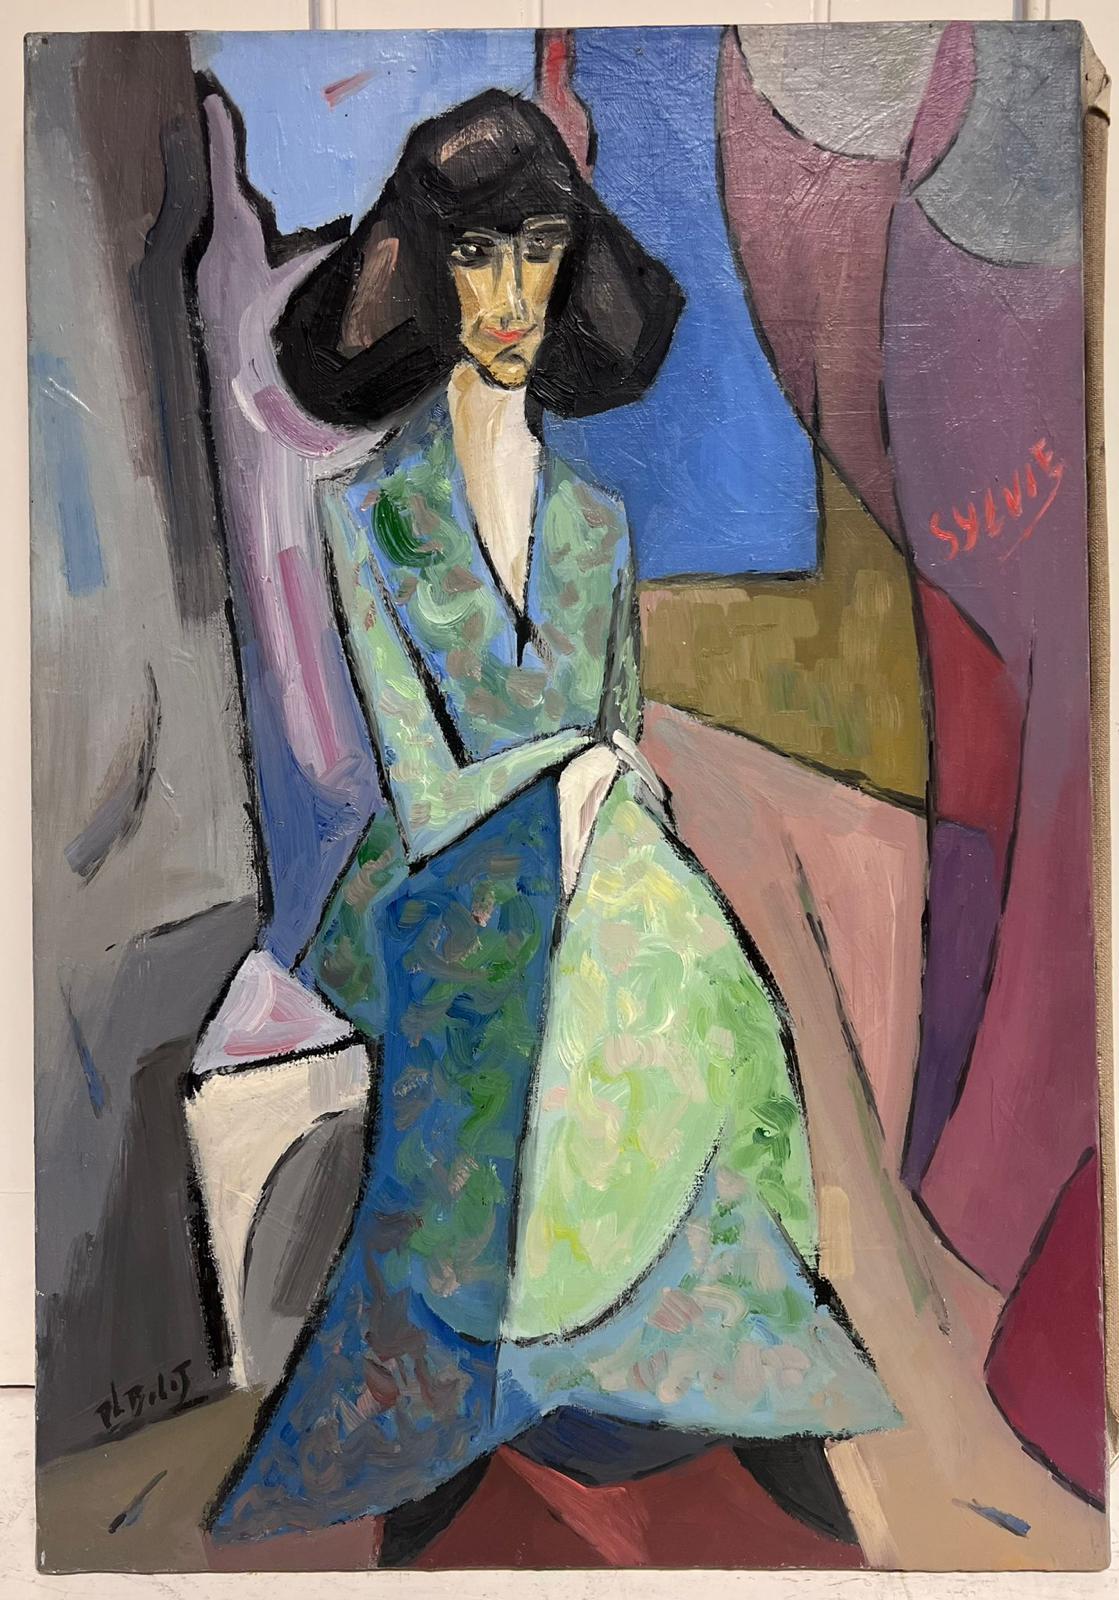 Sylvie
by Paul-Louis Bolot (French 1918-2003)
signed & dated 1981
signed oil on canvas
canvas: 22 x 15 inches
original oil painting
condition: very good and sound

provenance: all the paintings we have by this artist have come from the artists